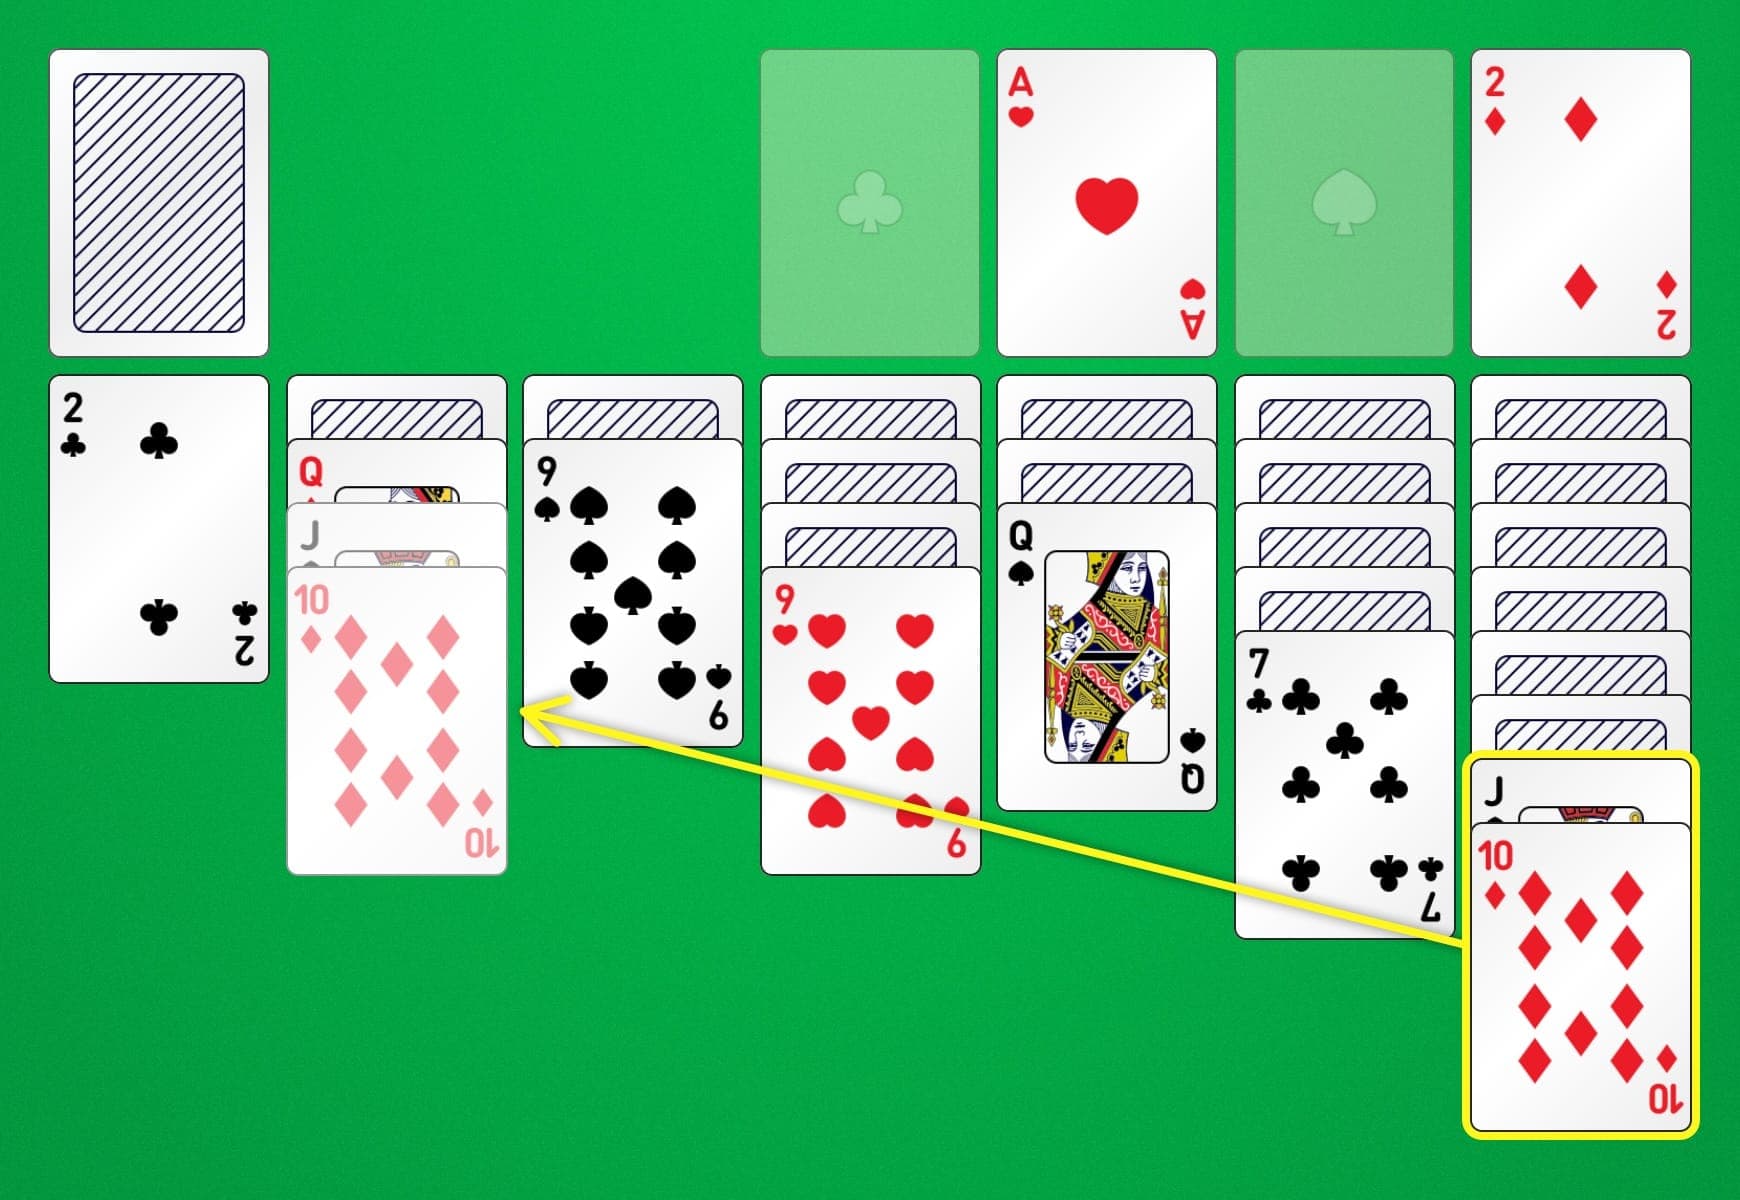 moed puree Manuscript Solitaire - Play Online | Free Solitaire Games